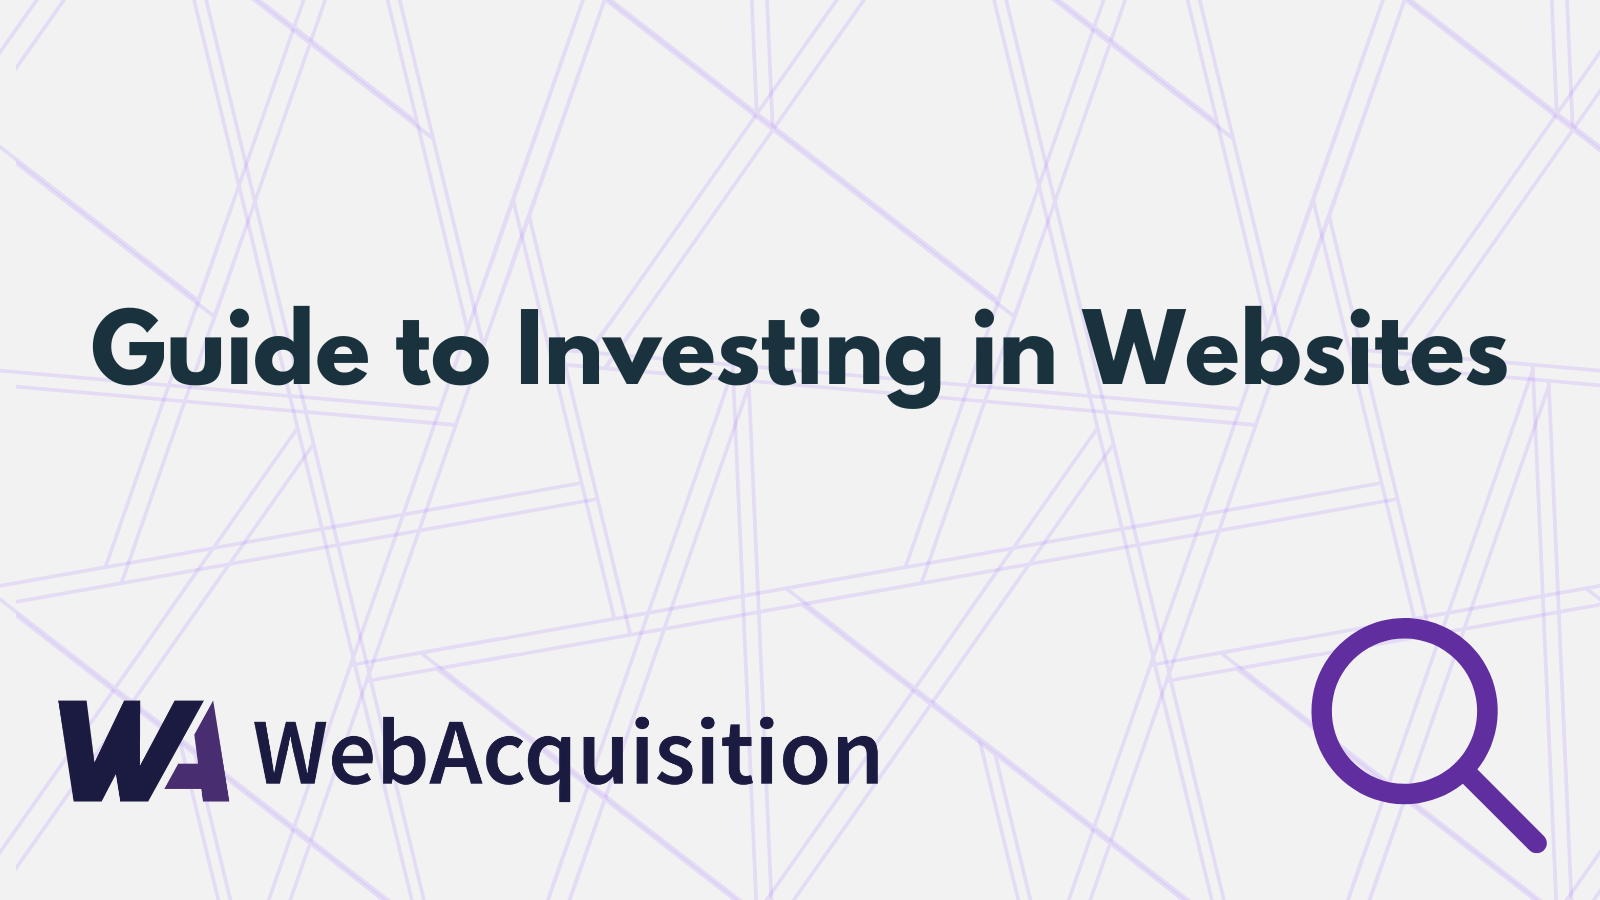 Guide to Investing in Websites